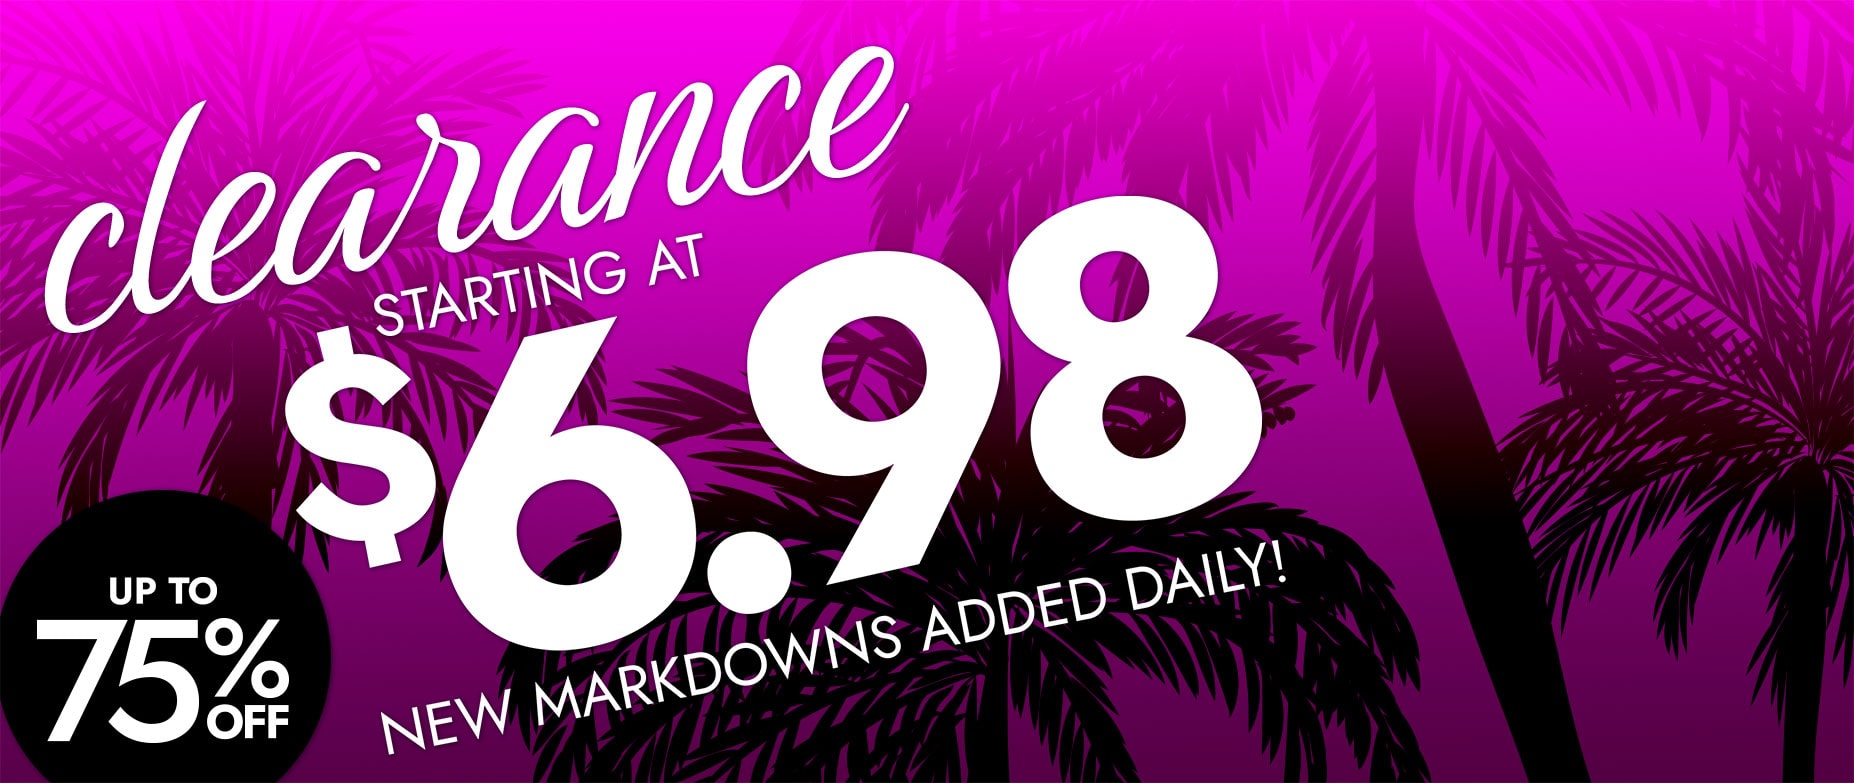 clearance starting at $6.98 new markdowns added daily